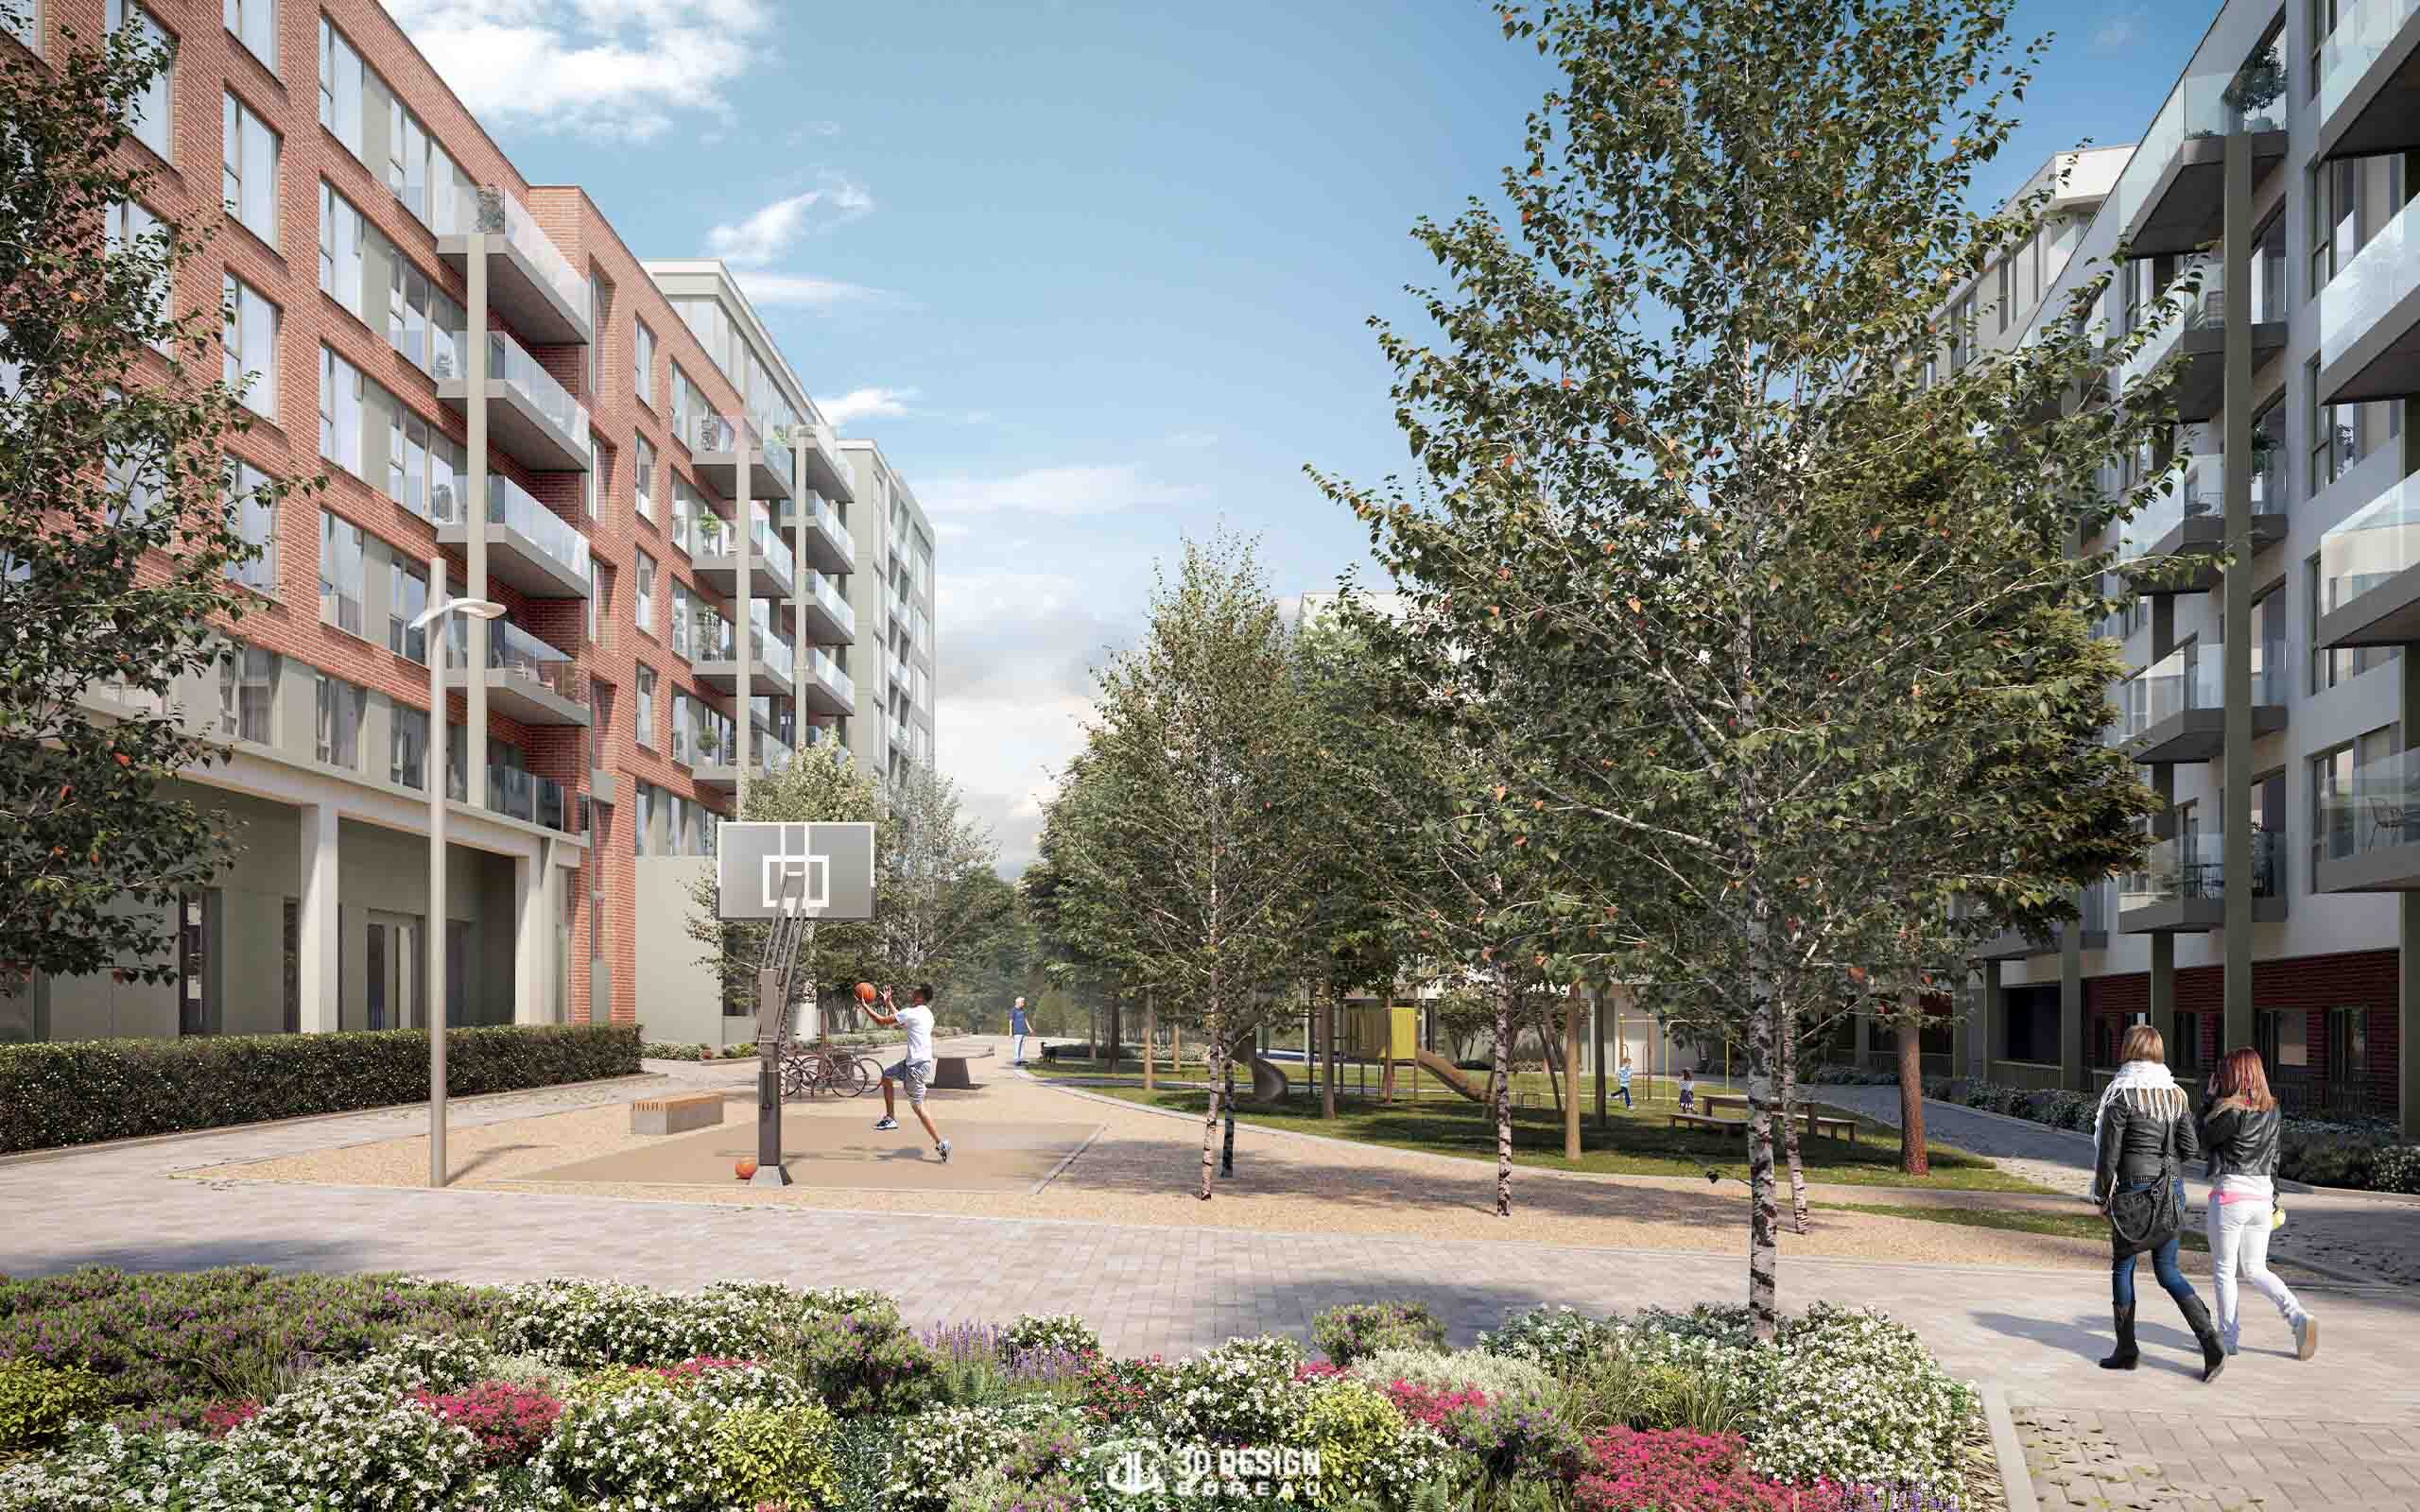 Architectural of proposed apartments at Airton Road, Tallaght